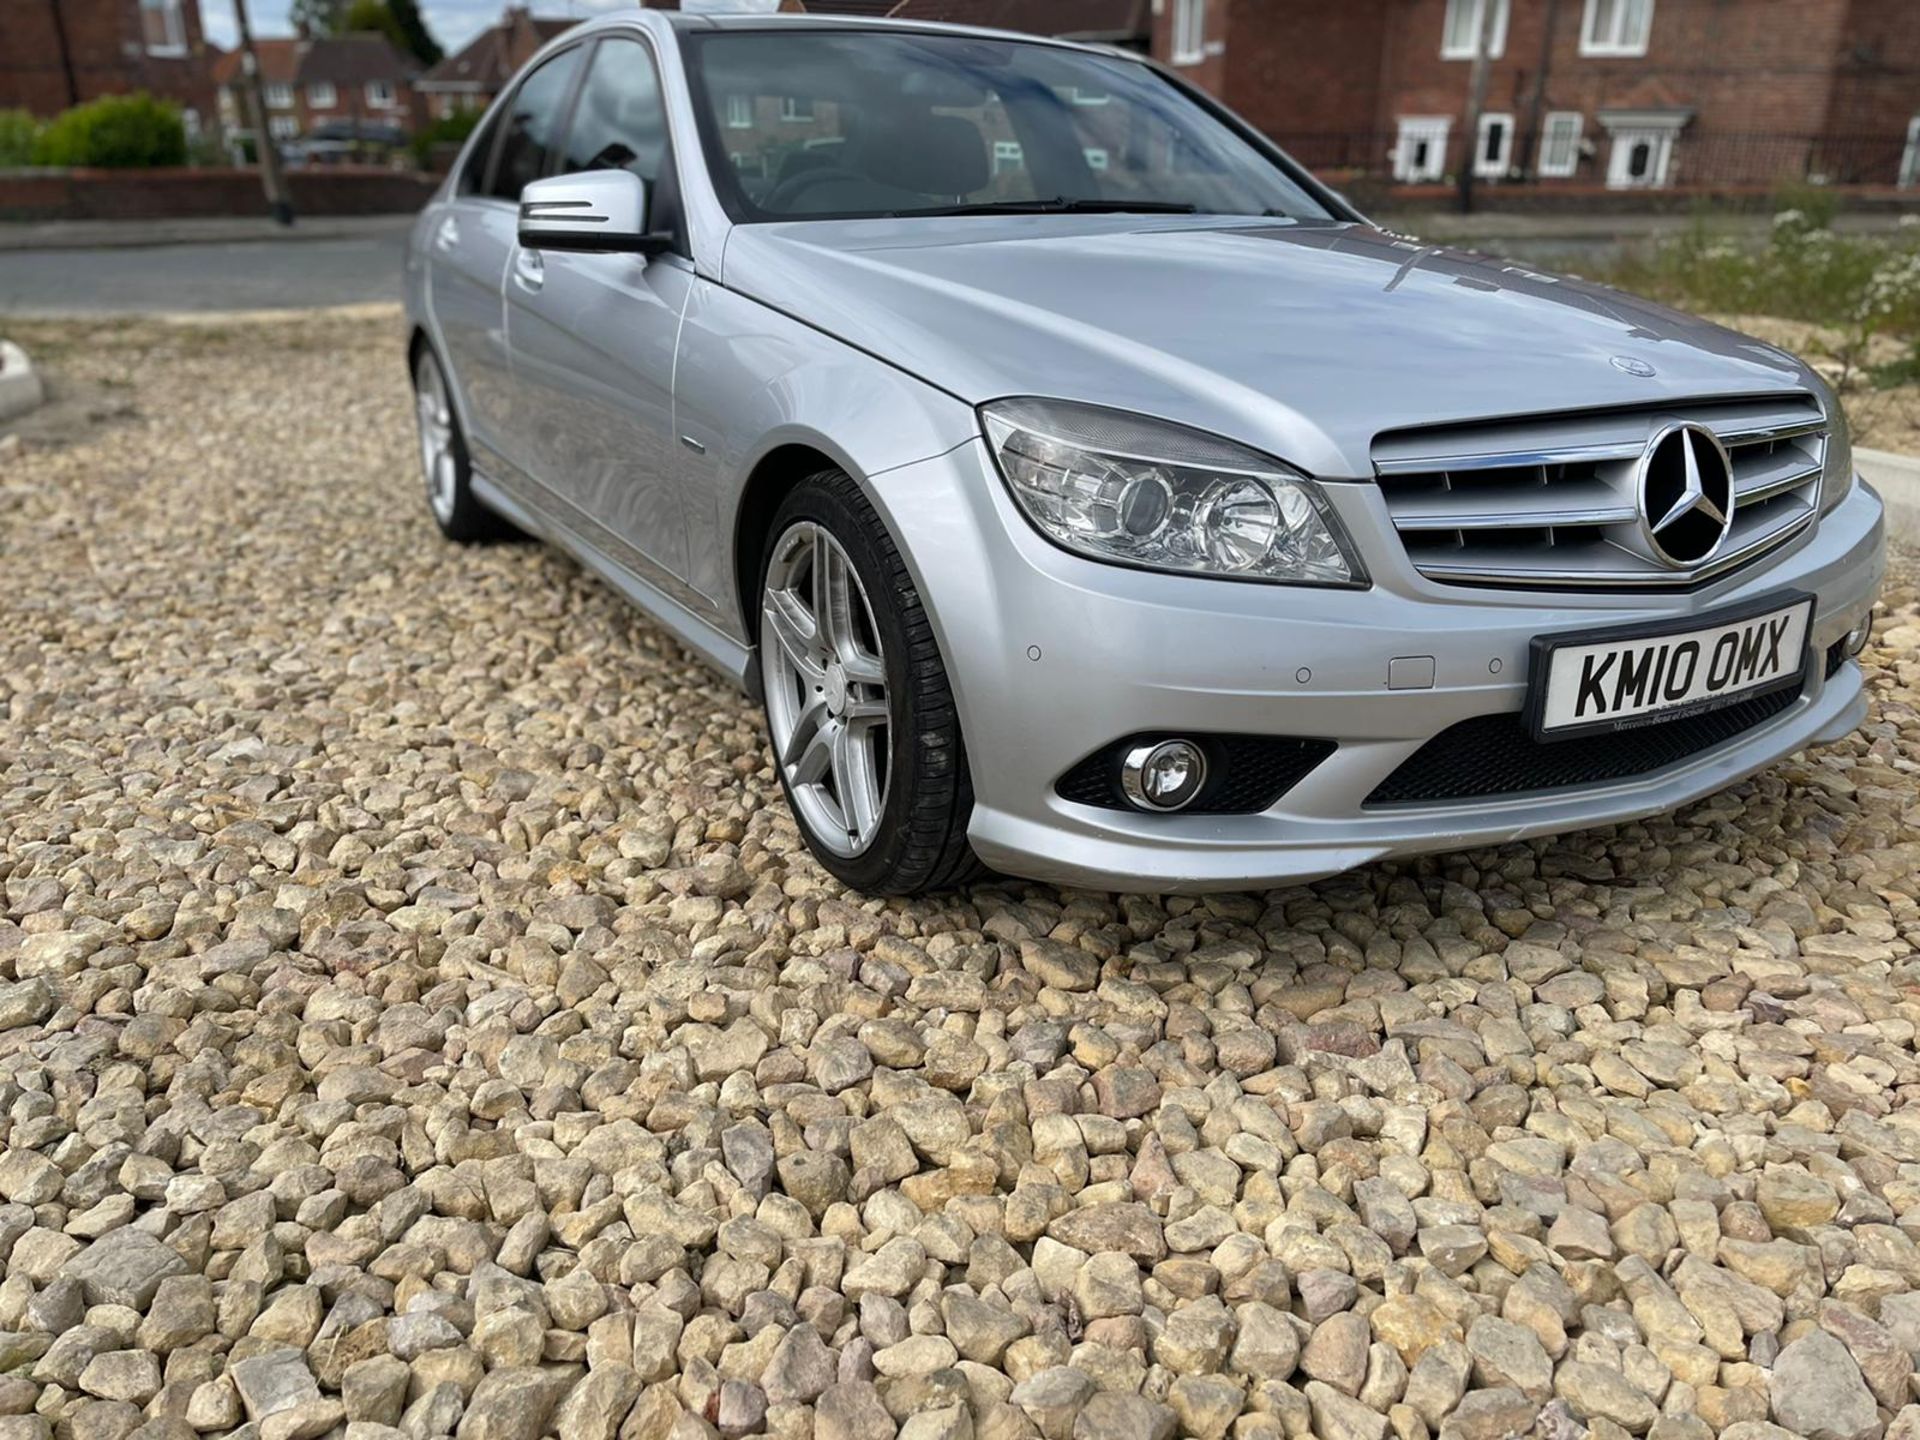 2010 MERCEDES-BENZ C220 BLUEF-CY SPORT CDI A, PANORAMIC ROOF AND PHONE CONNECTIVITY *NO VAT* - Image 2 of 11